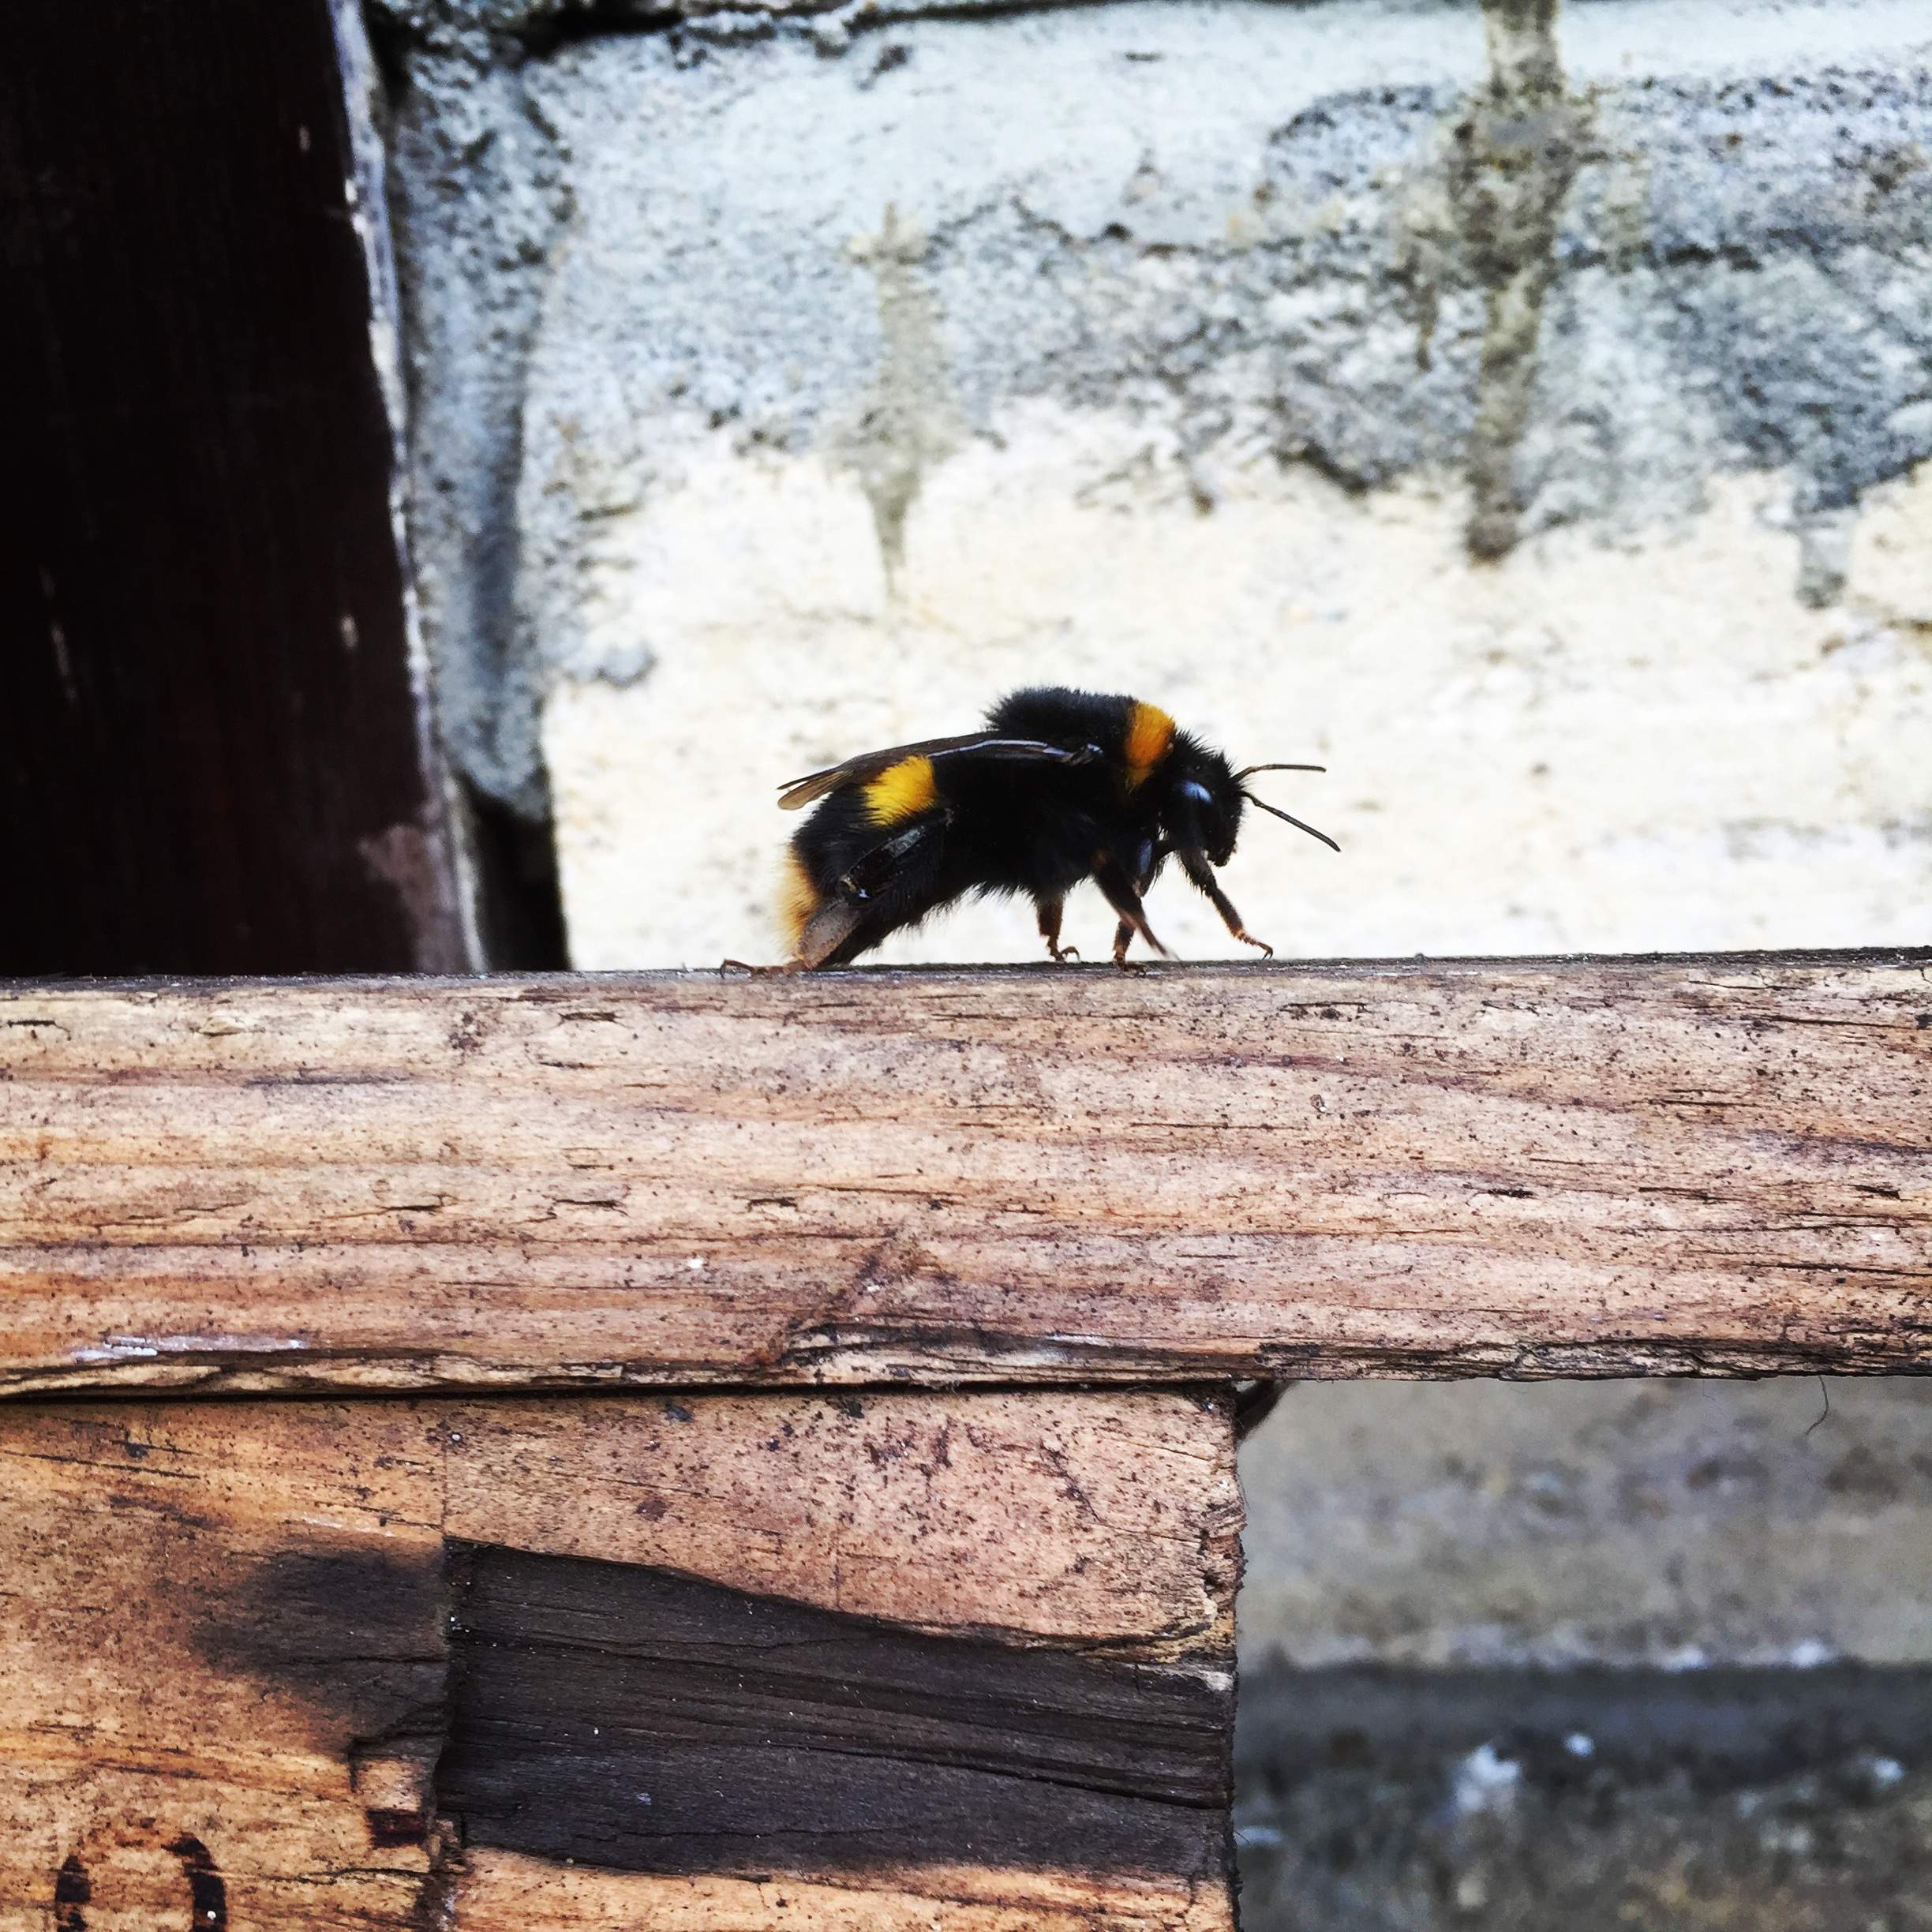 Queen Bumble Bees hibernate in our workshops over Winter